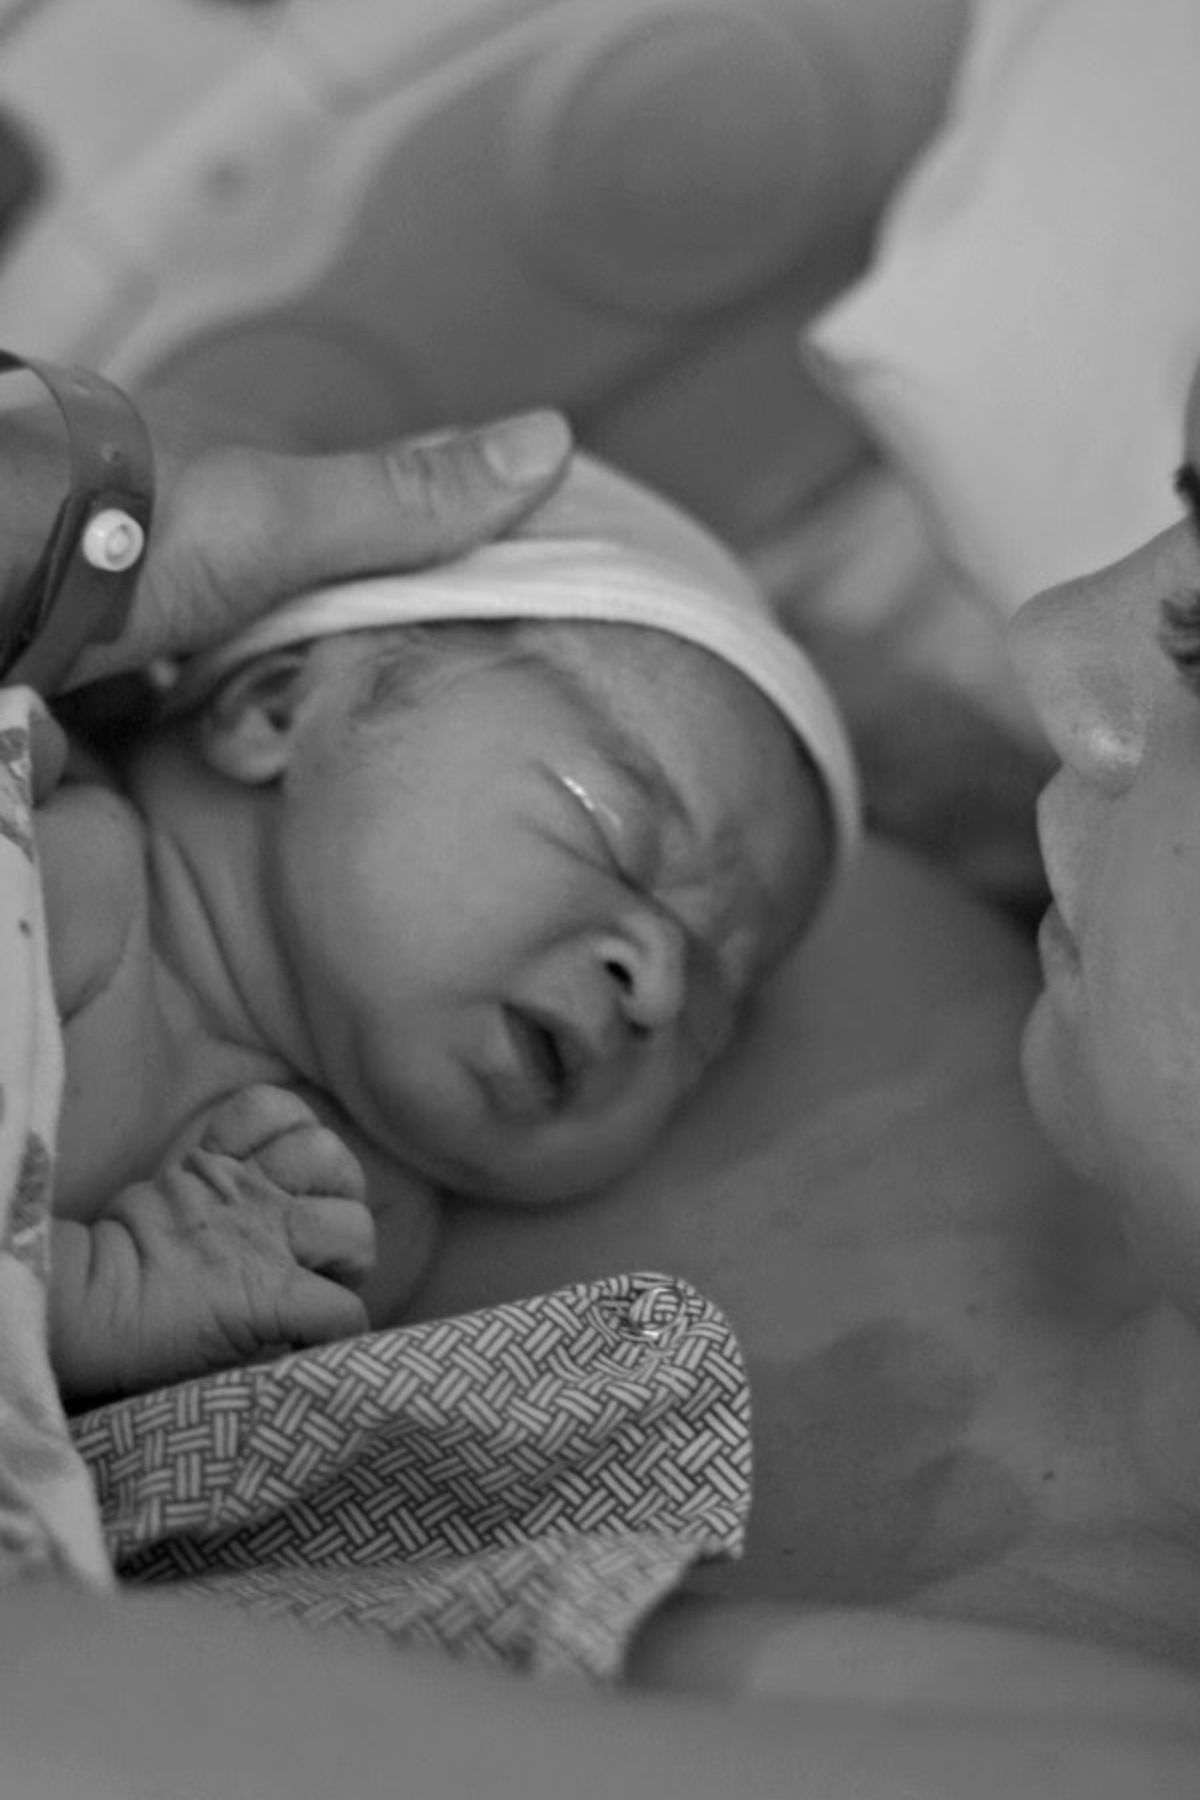 Black and white photo of woman holding baby boy wearing hat after delivery.